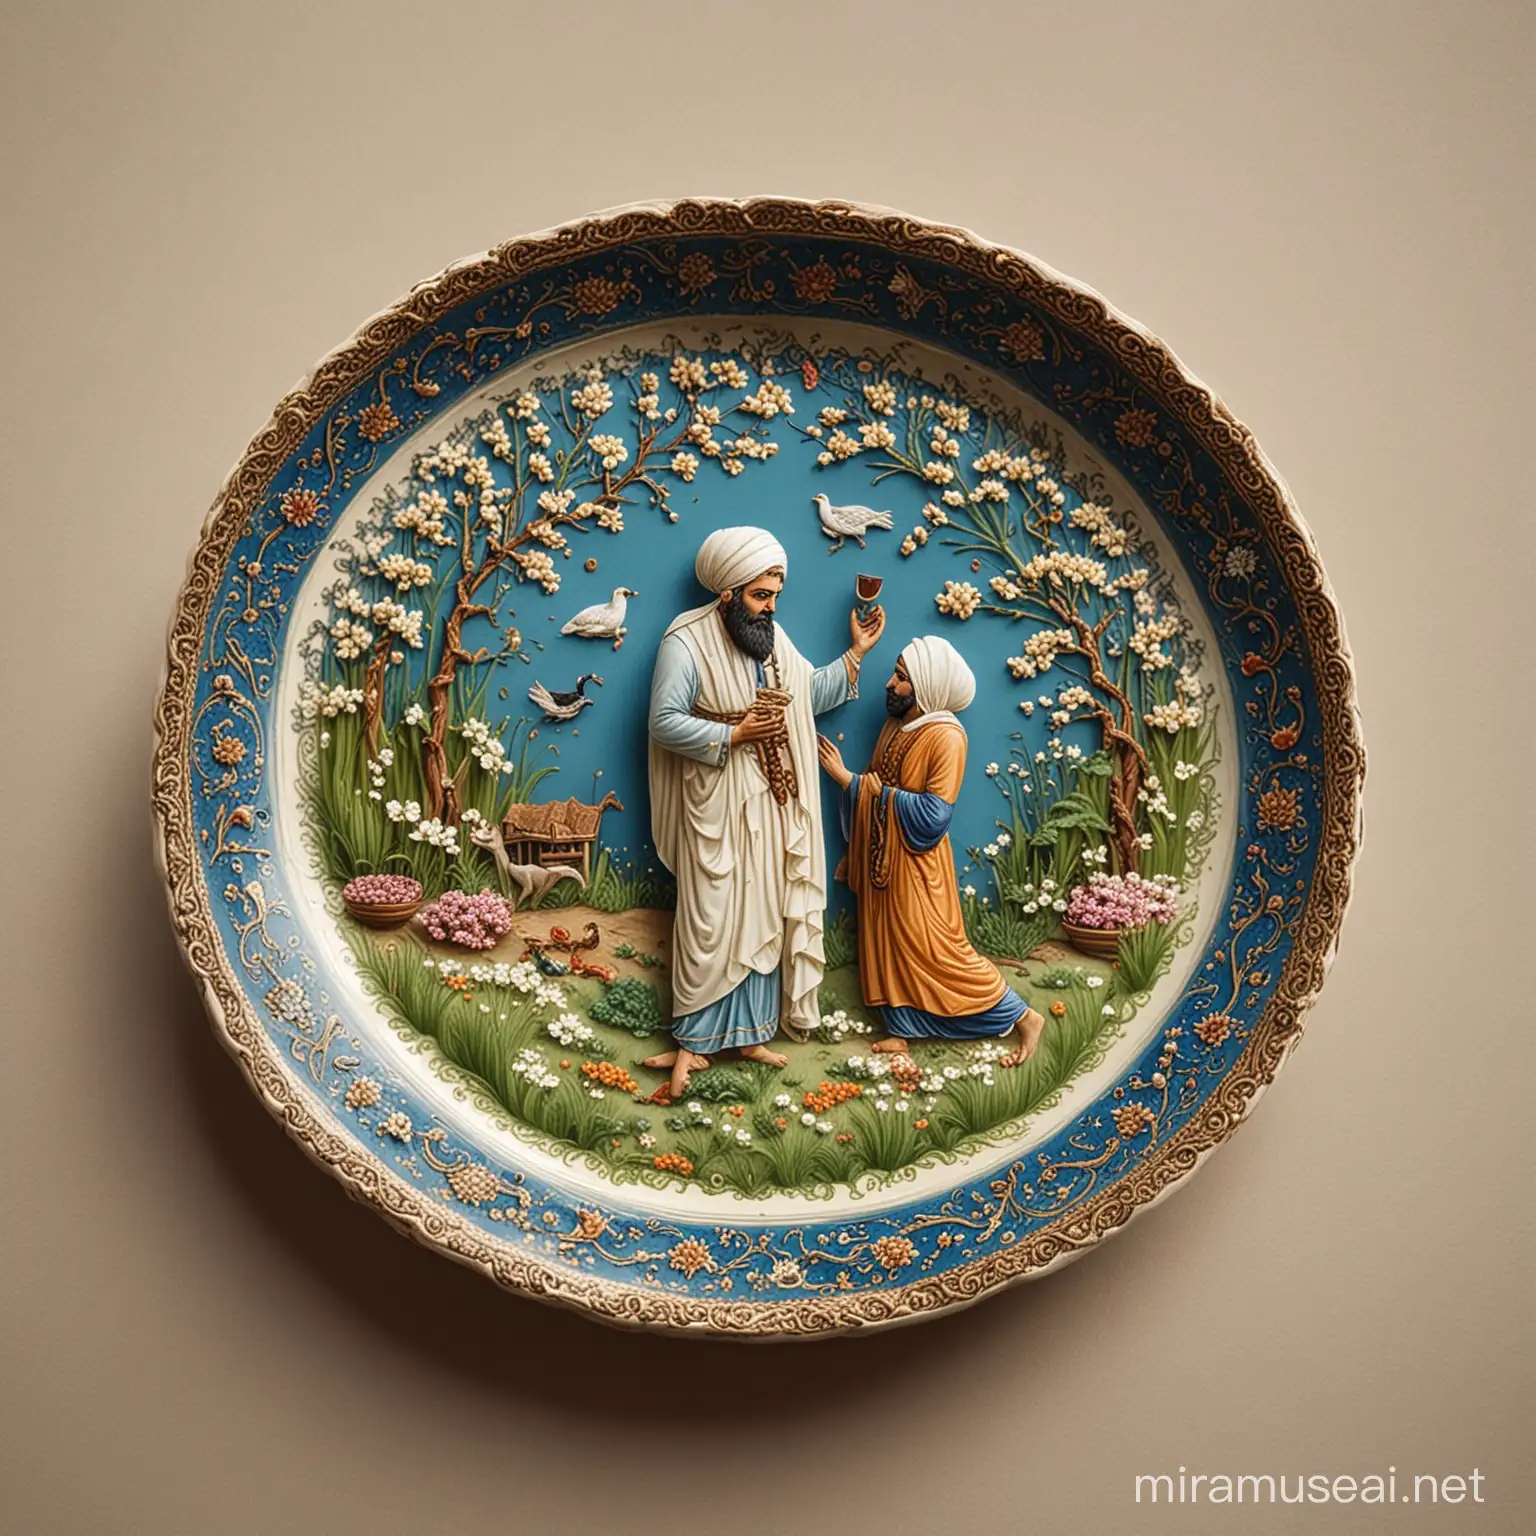 An Iranian myth in a miniature design holding a plate of rice